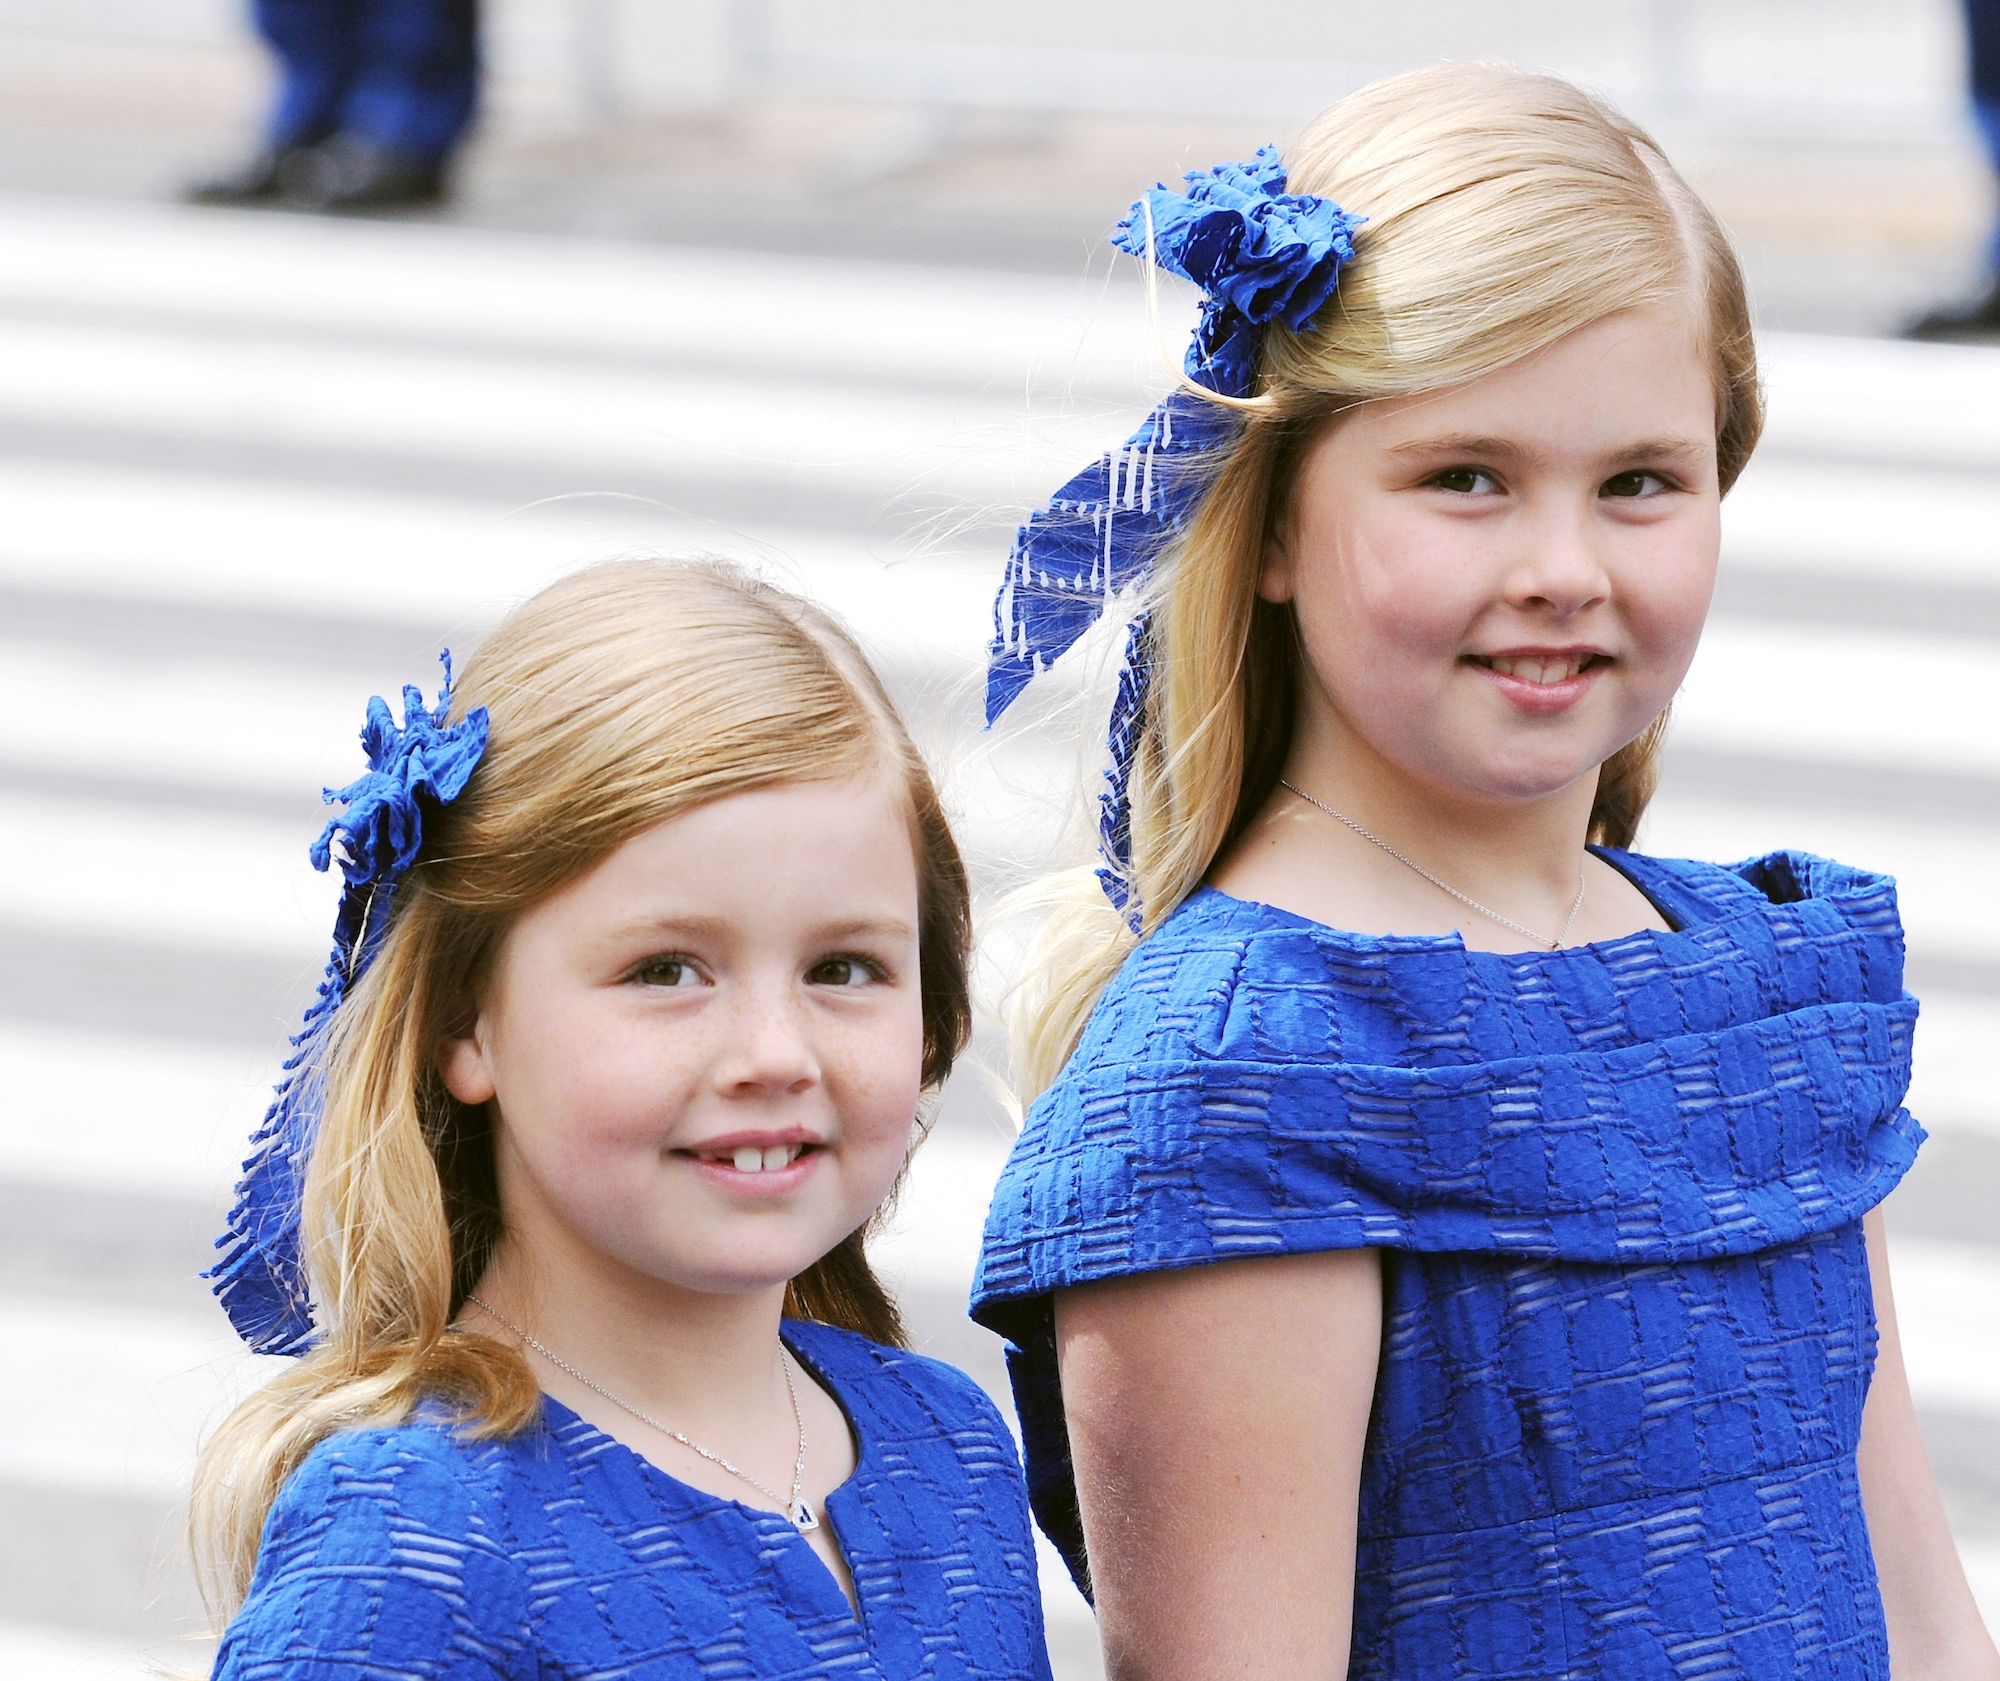 Princess Alexia with sister Amalia during their father's inauguration in 2013.